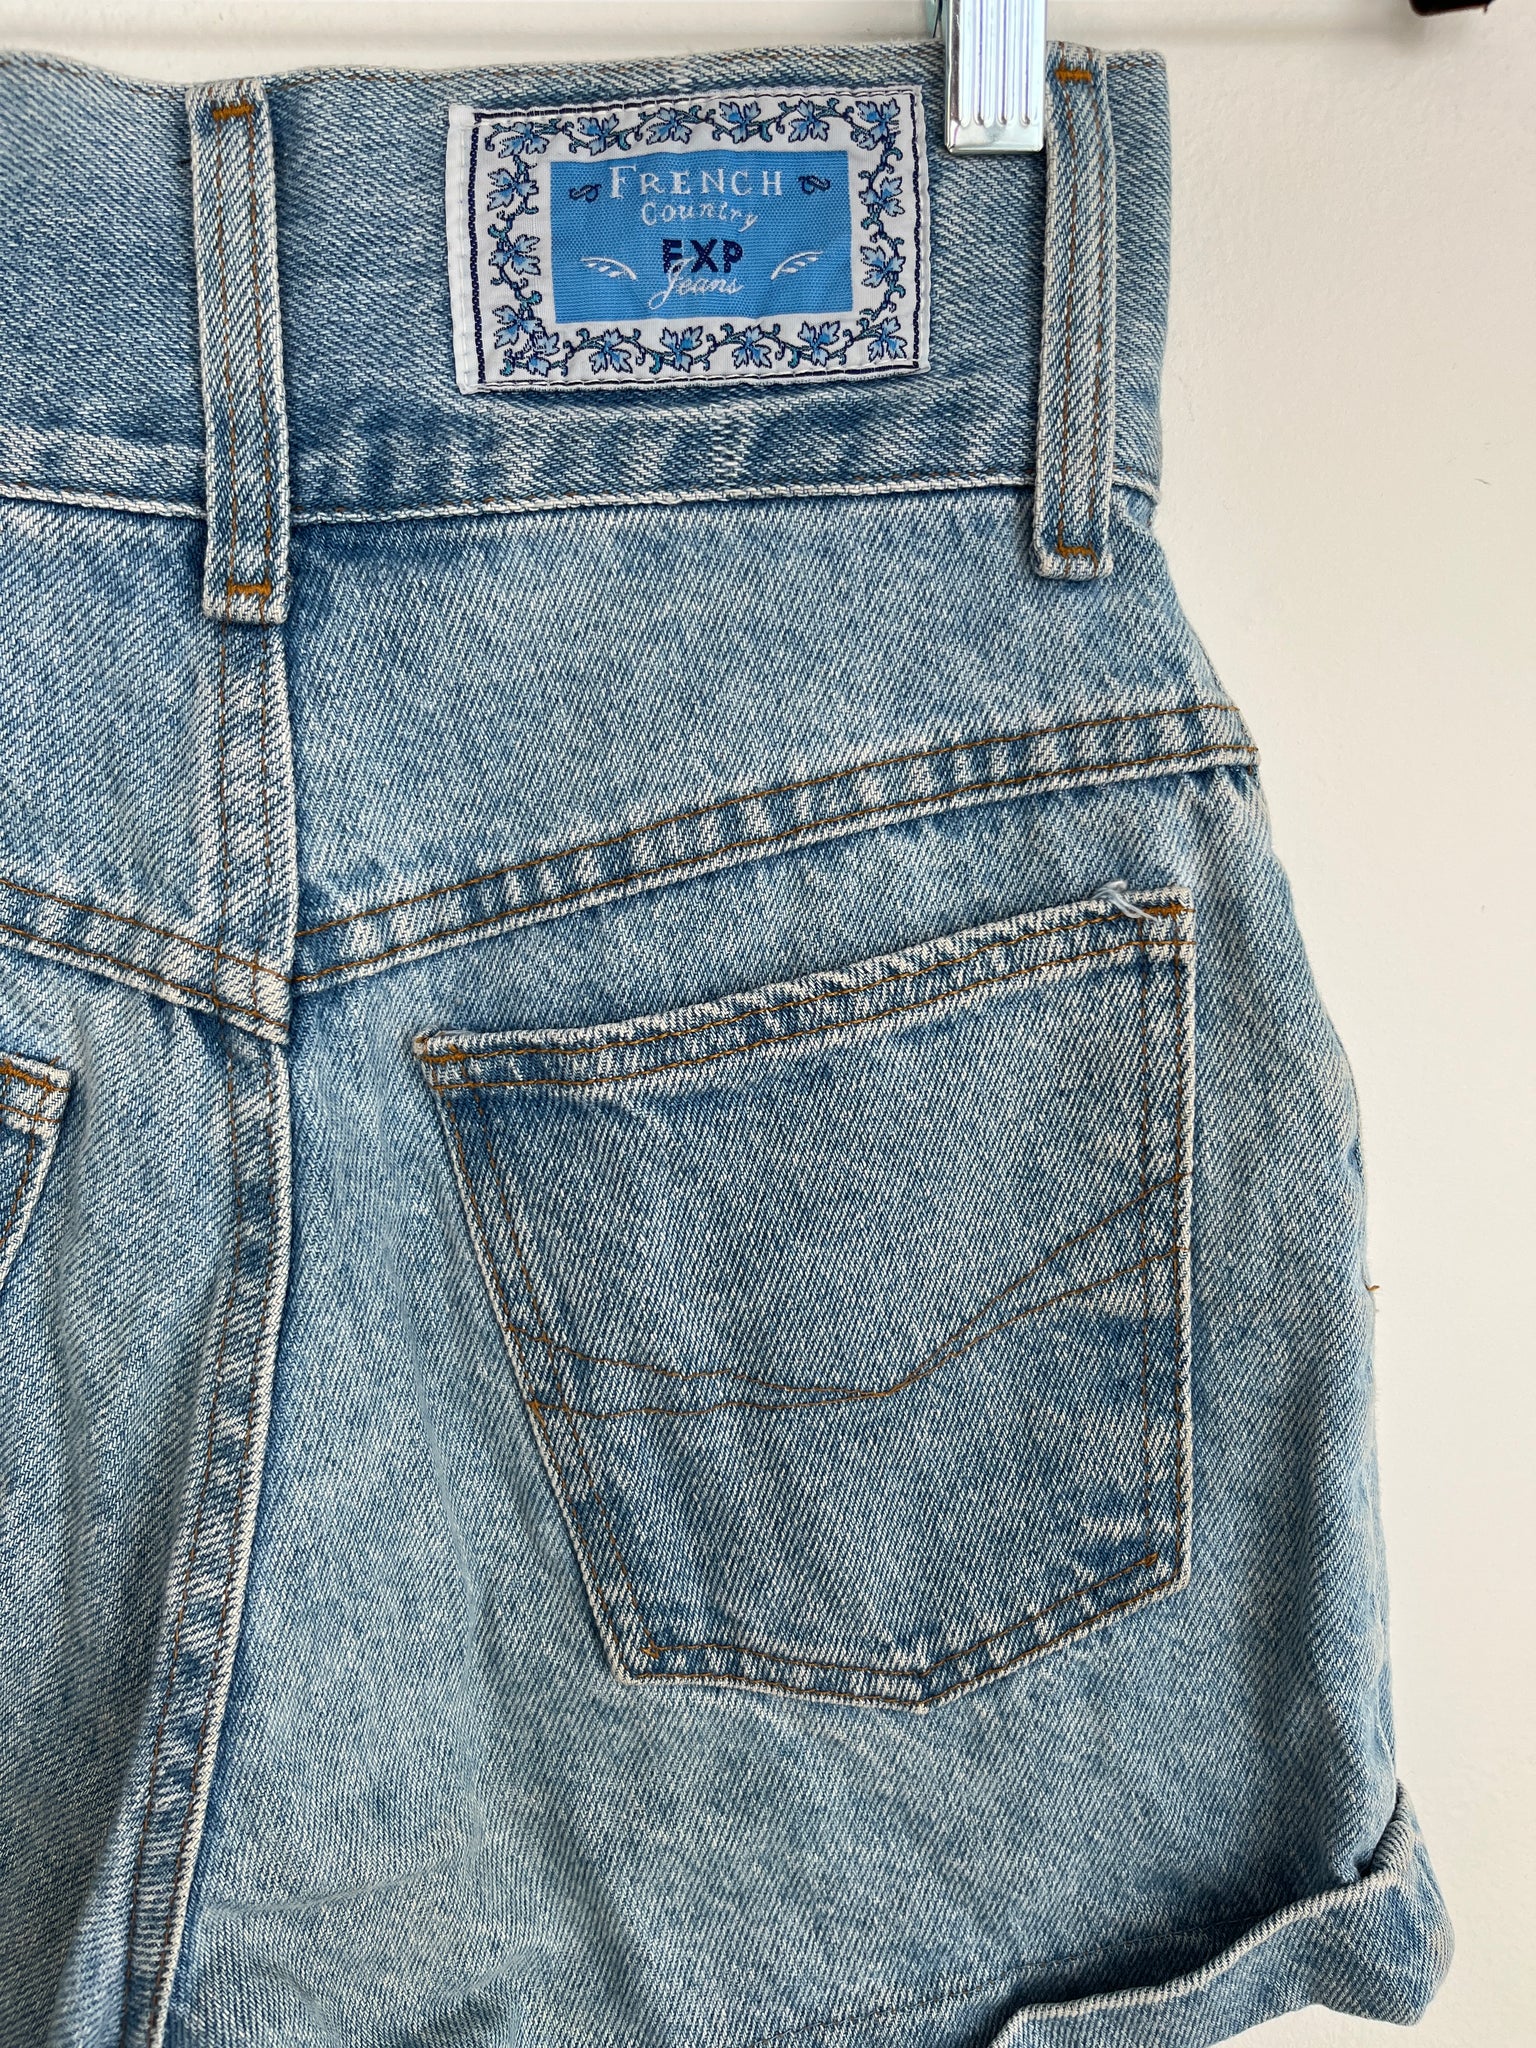 1990s SHORTS- DENIM-EXP French country